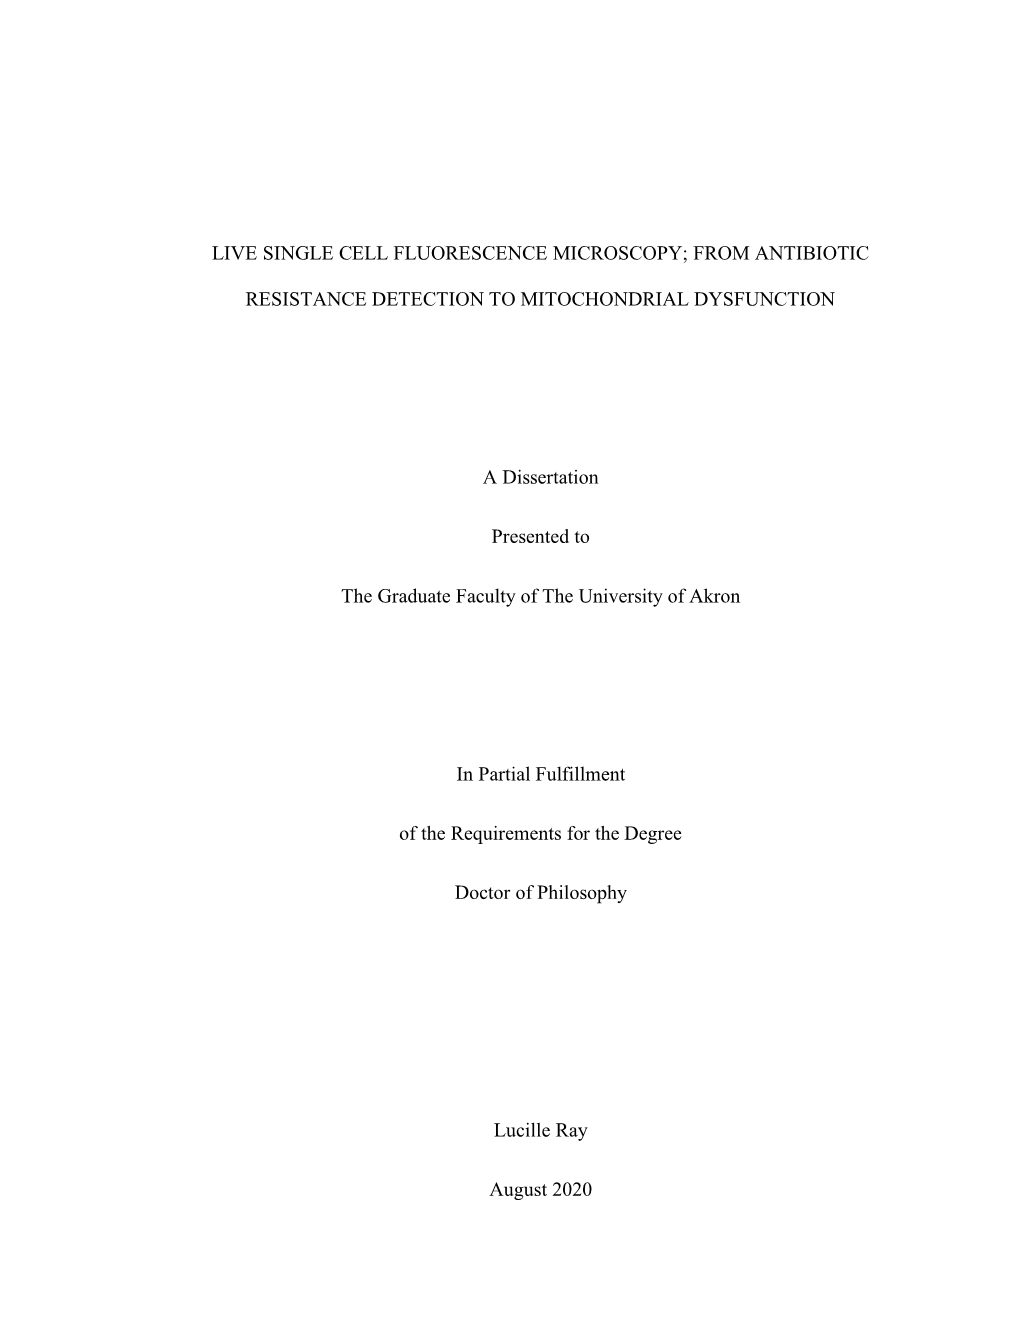 LIVE SINGLE CELL FLUORESCENCE MICROSCOPY; from ANTIBIOTIC RESISTANCE DETECTION to MITOCHONDRIAL DYSFUNCTION a Dissertation Prese